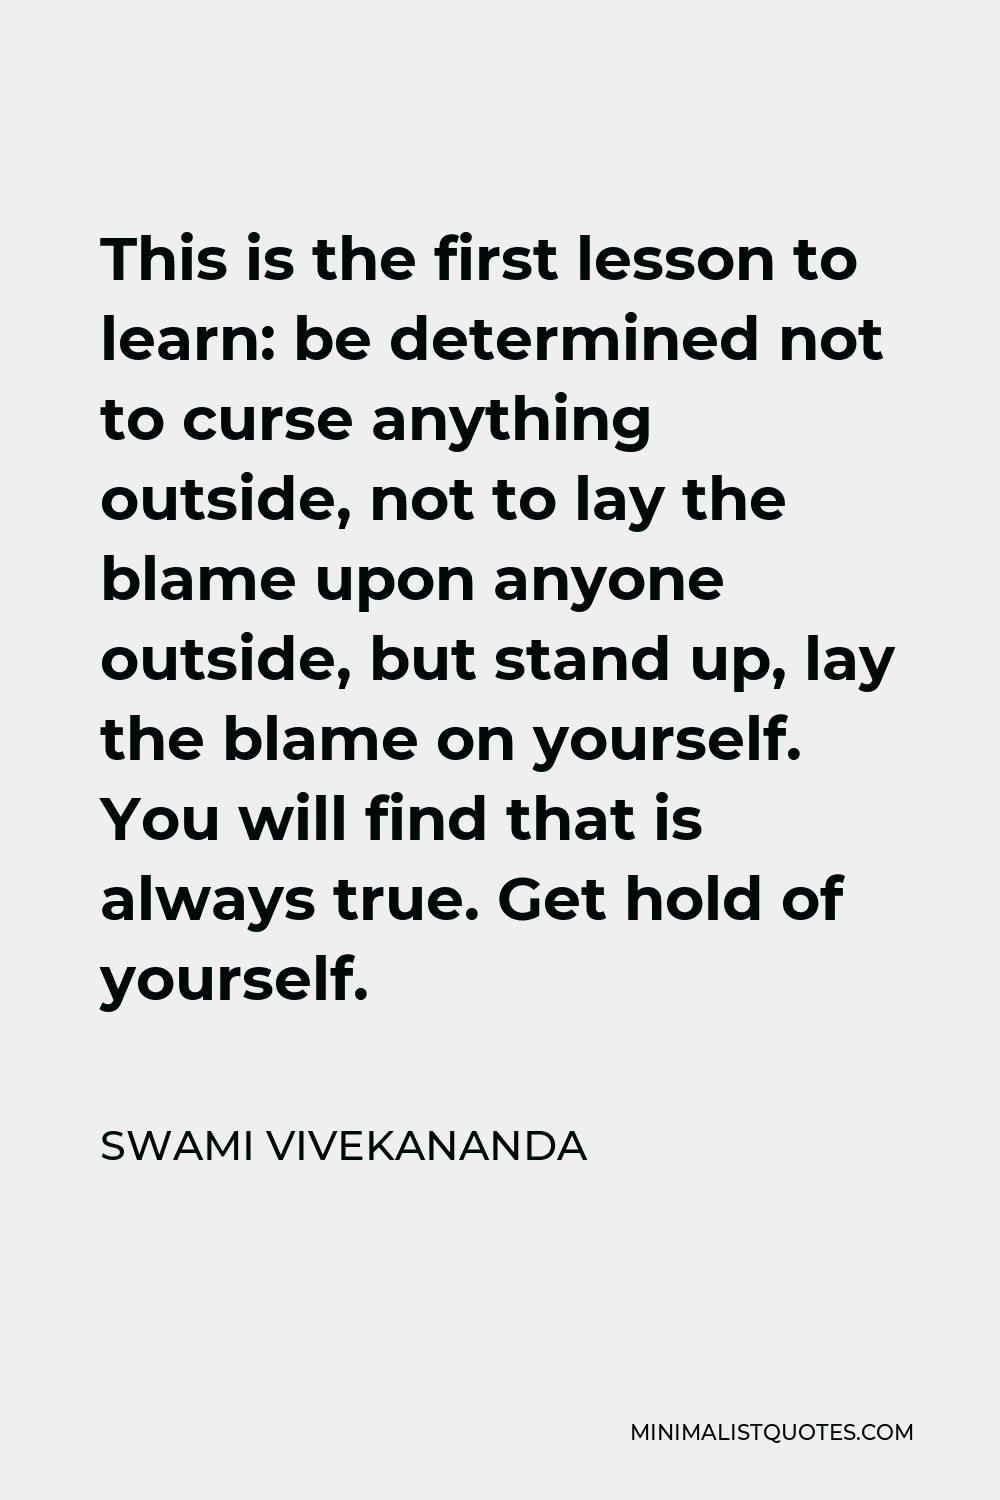 Swami Vivekananda Quote - This is the first lesson to learn: be determined not to curse anything outside, not to lay the blame upon anyone outside, but stand up, lay the blame on yourself. You will find that is always true. Get hold of yourself.